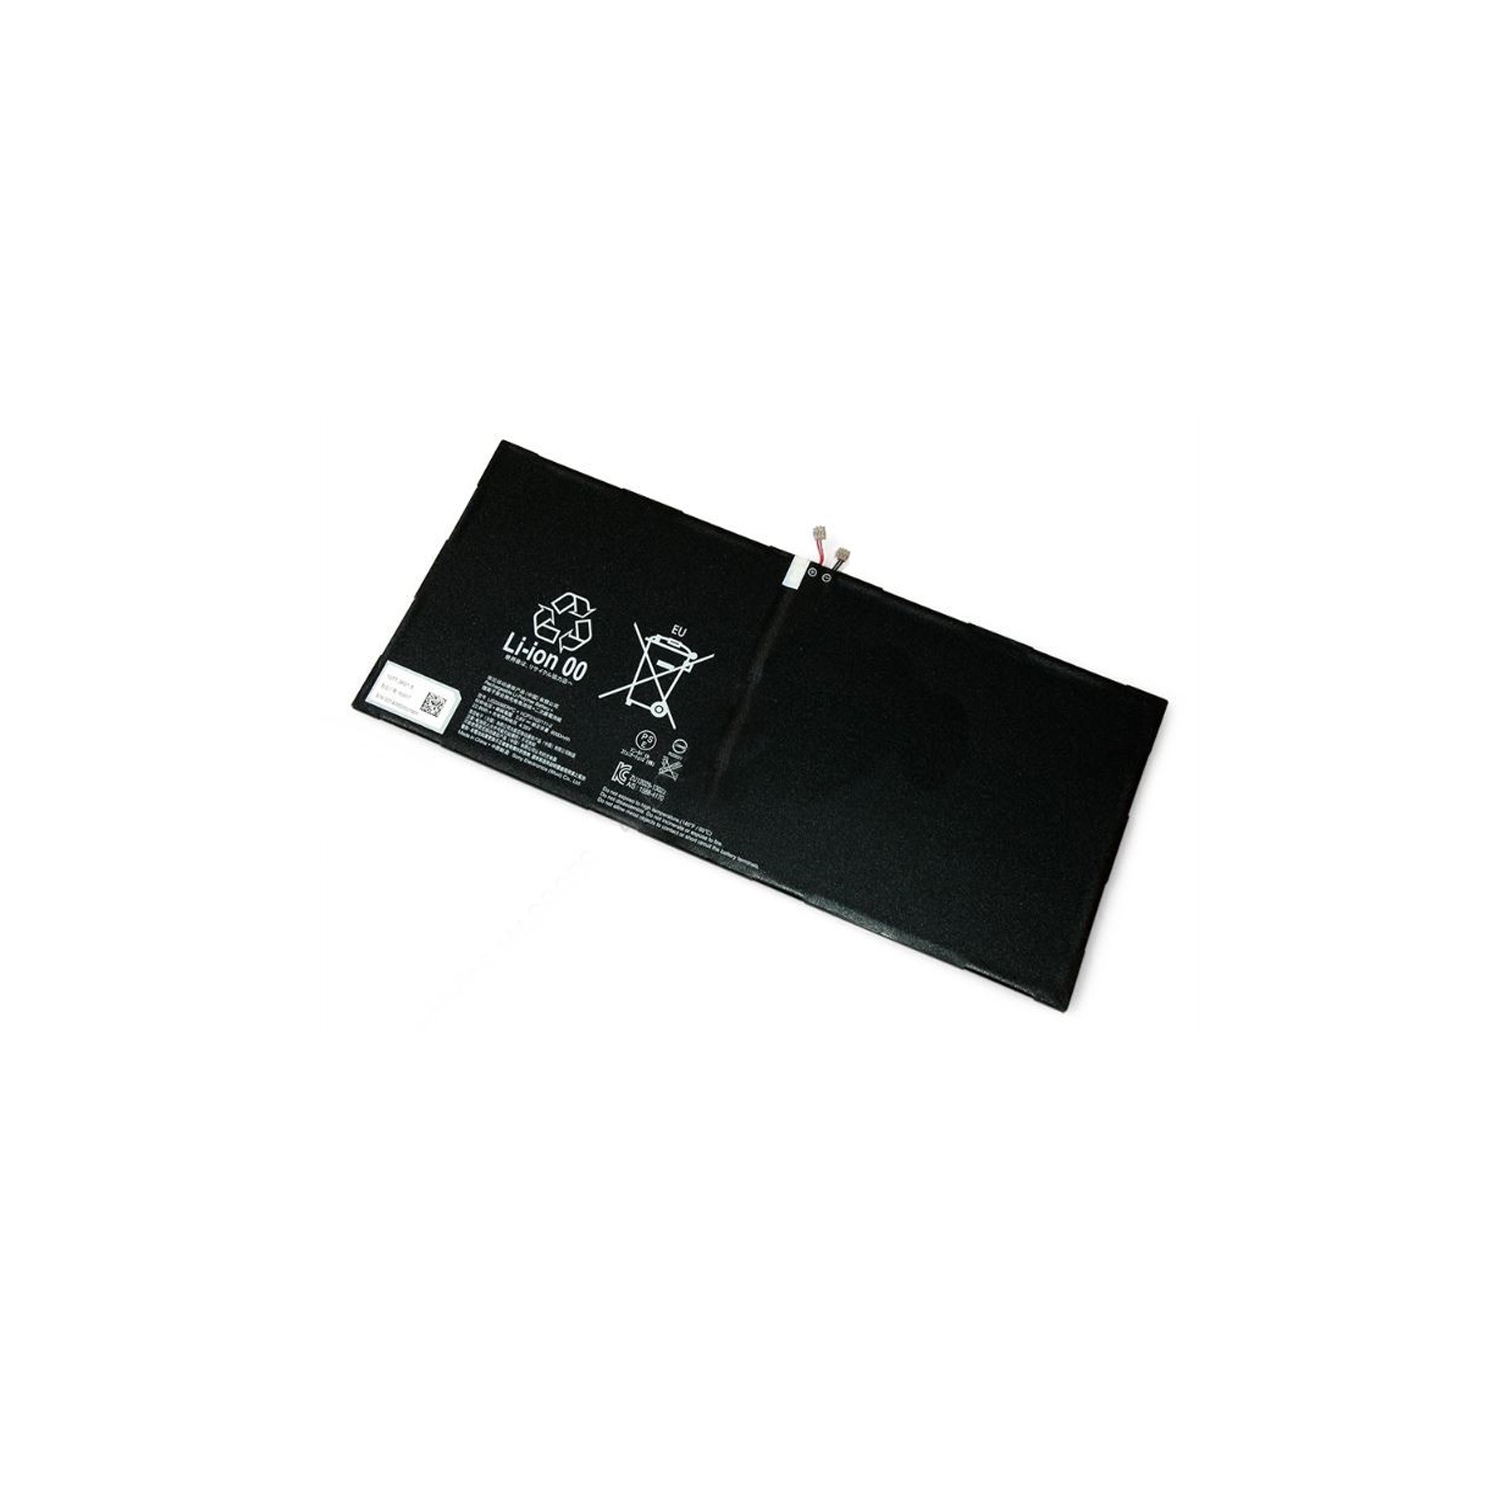 Sony Xperia Tablet Z2 10.1 SGP511 Battery Replacement